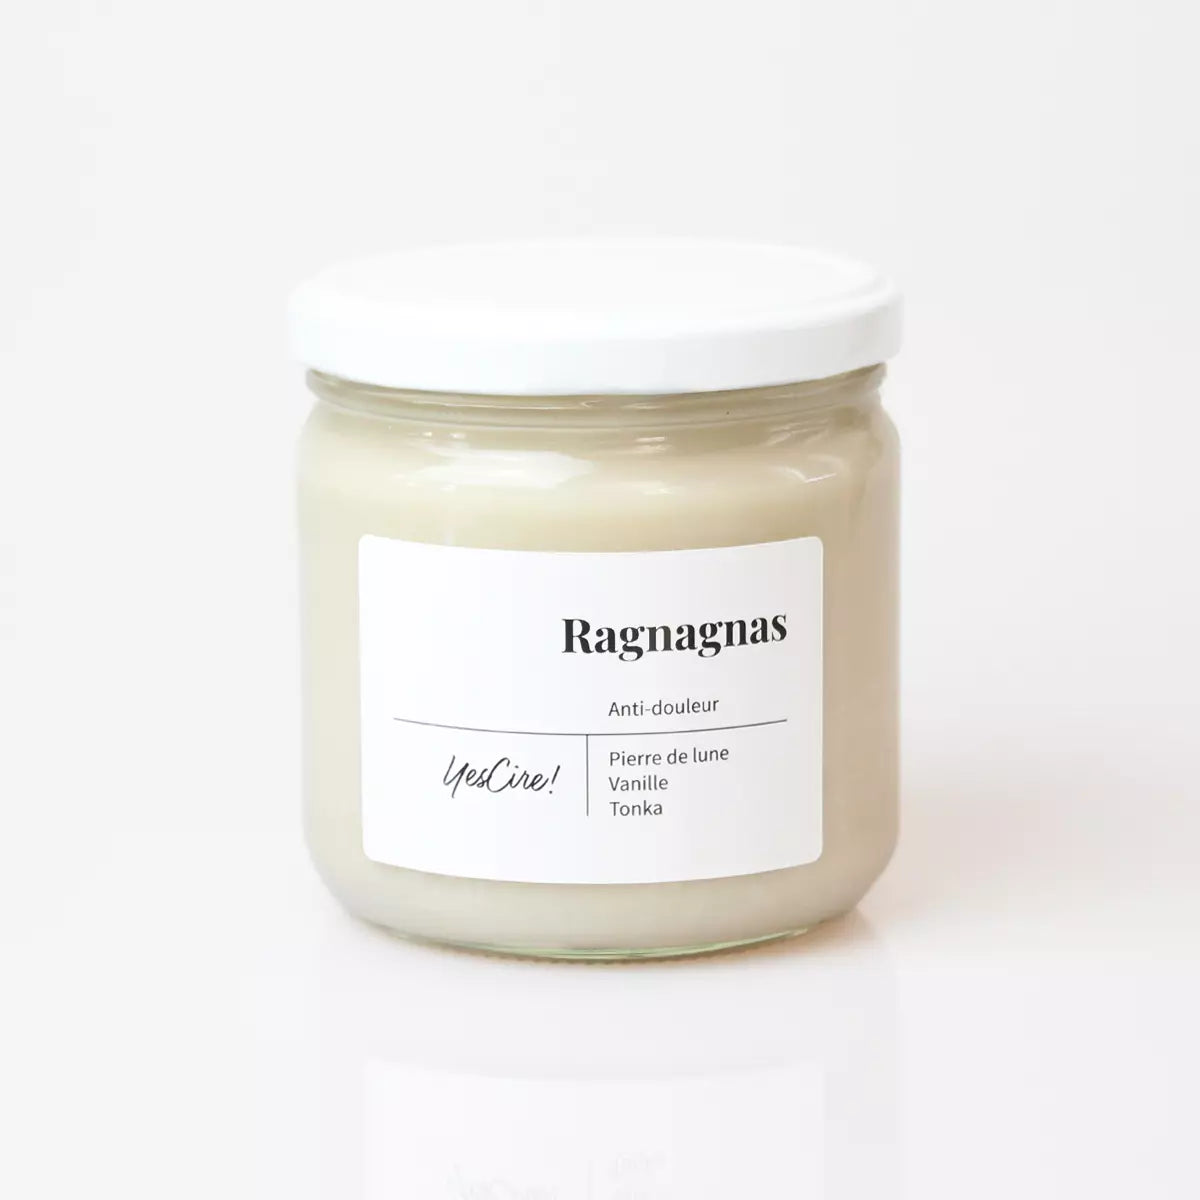 Lithotherapy candle | Ragnagnas | “Pain-relieving” moonstone